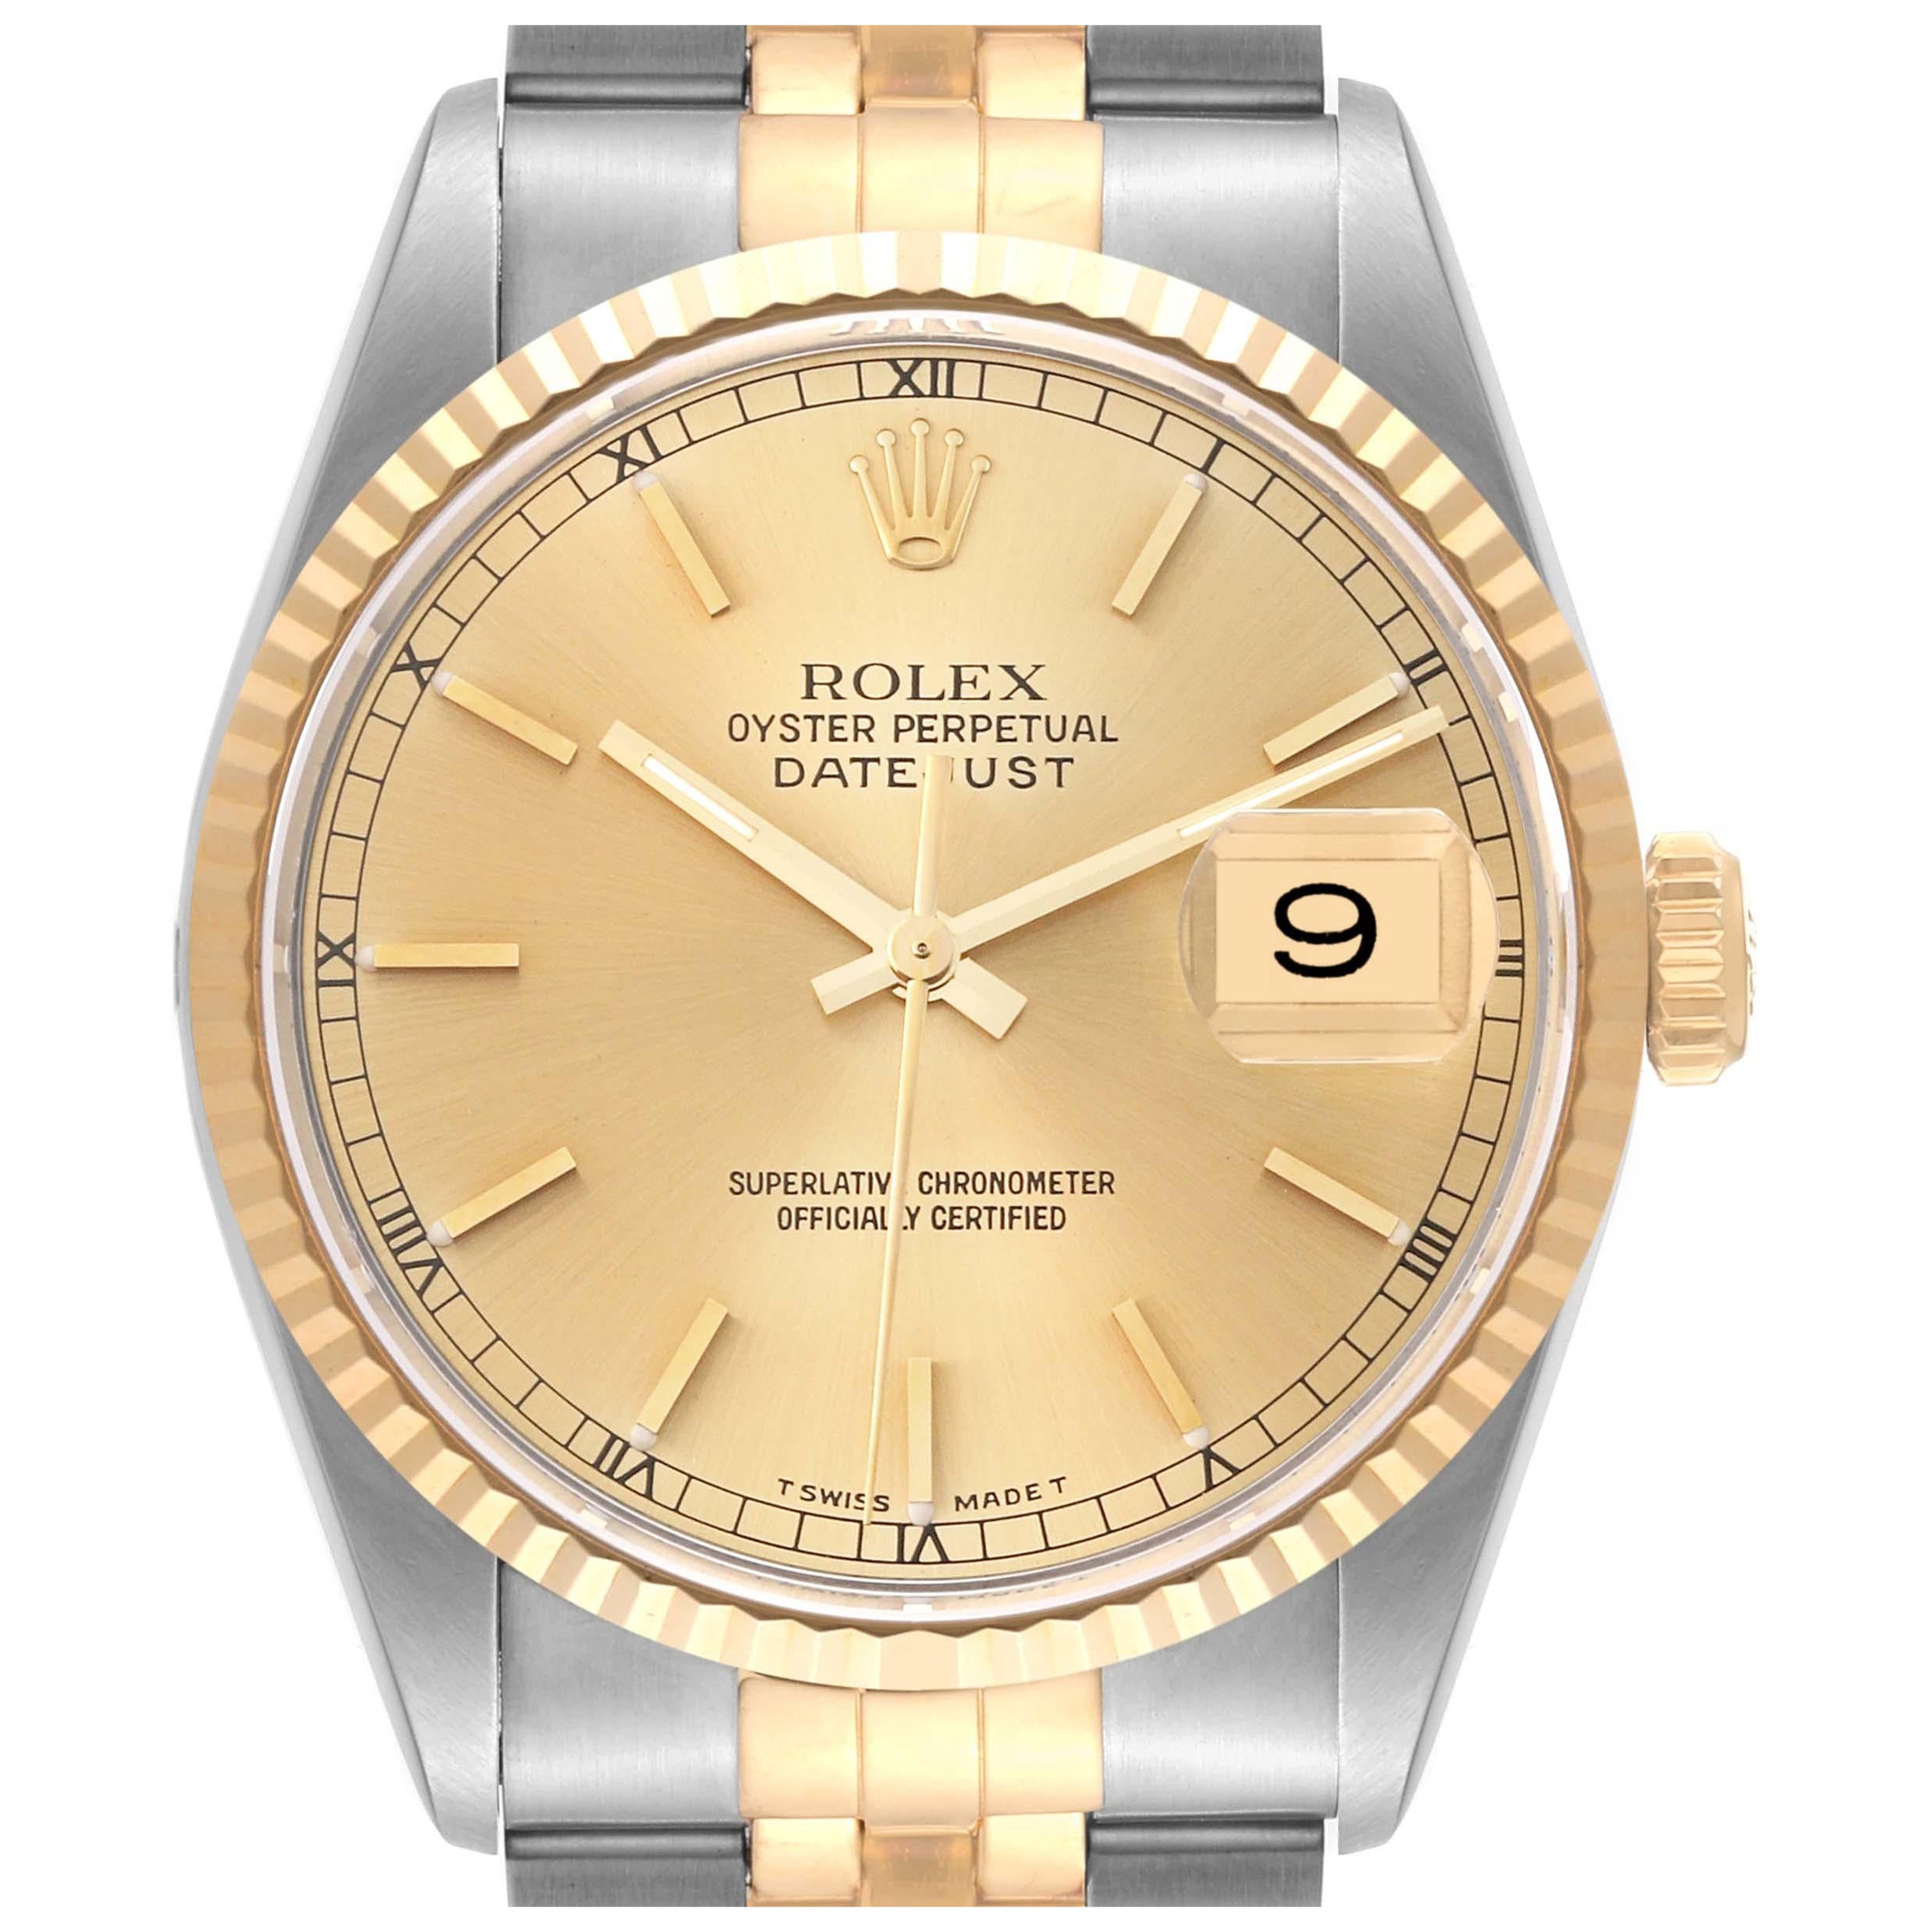 Rolex Datejust 36 Steel Yellow Gold Champagne Dial Mens Watch 16233 Box Papers For Sale